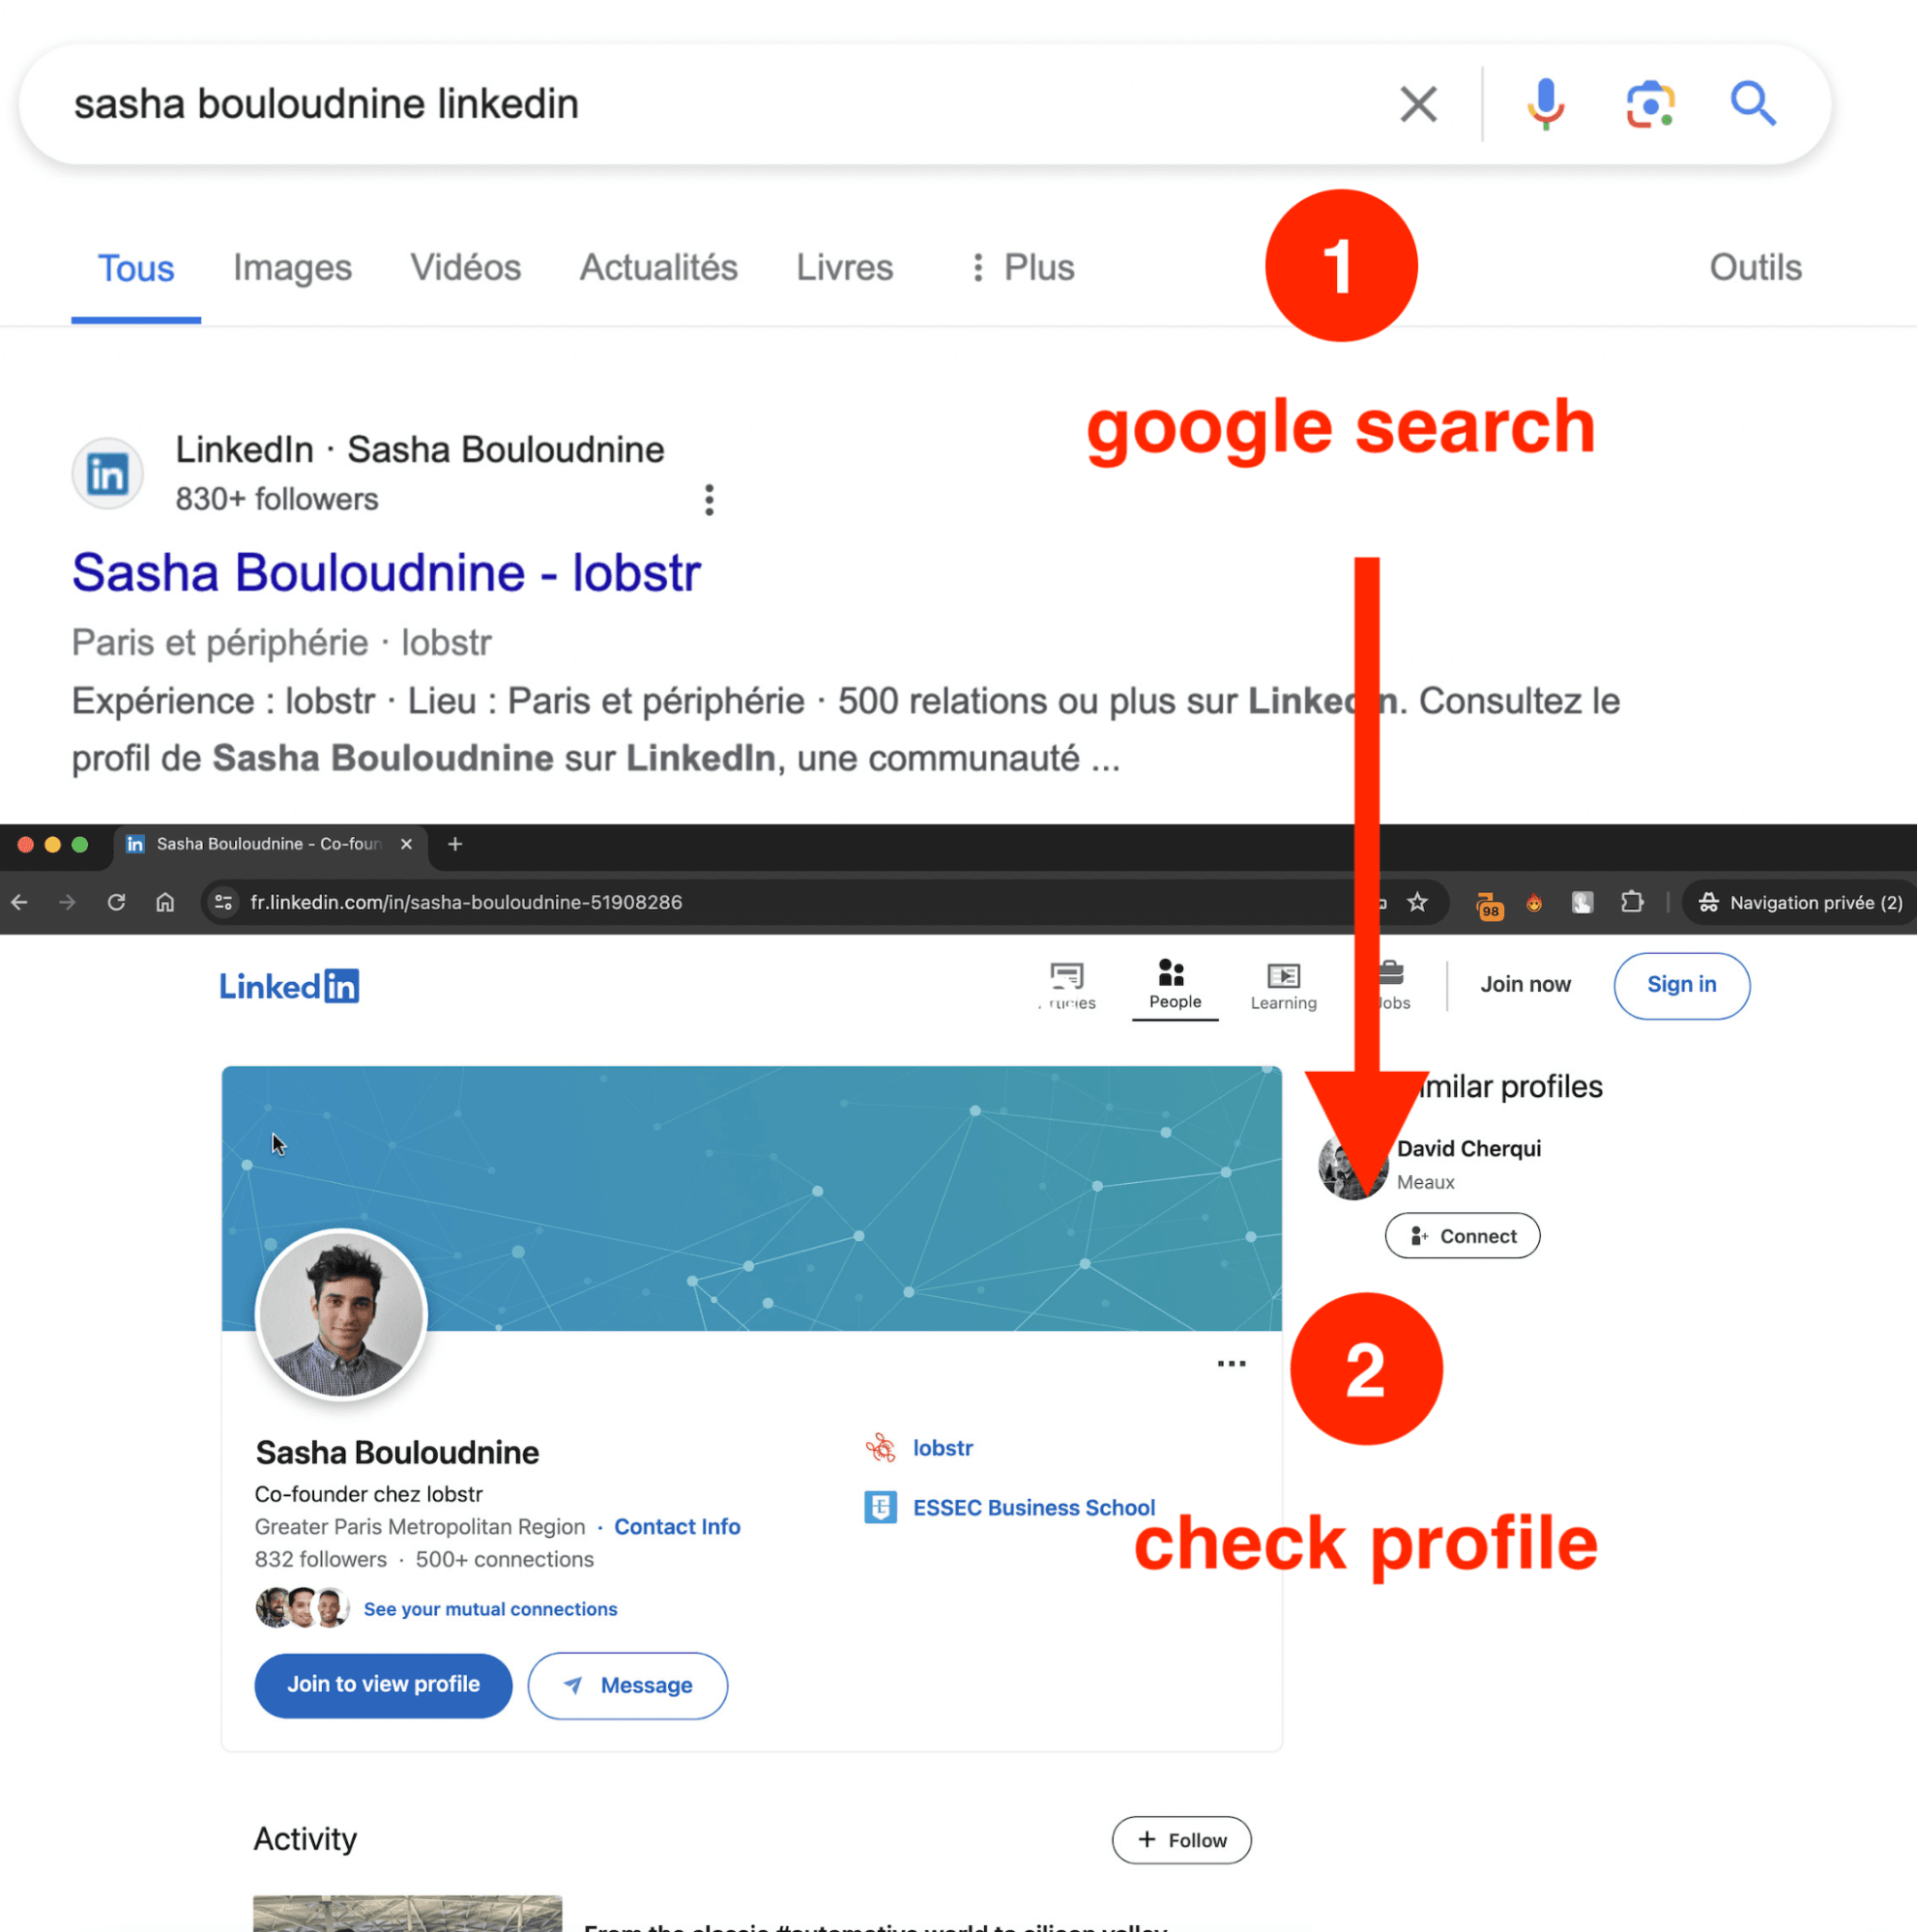 check linkedin profile after google search - image6.png